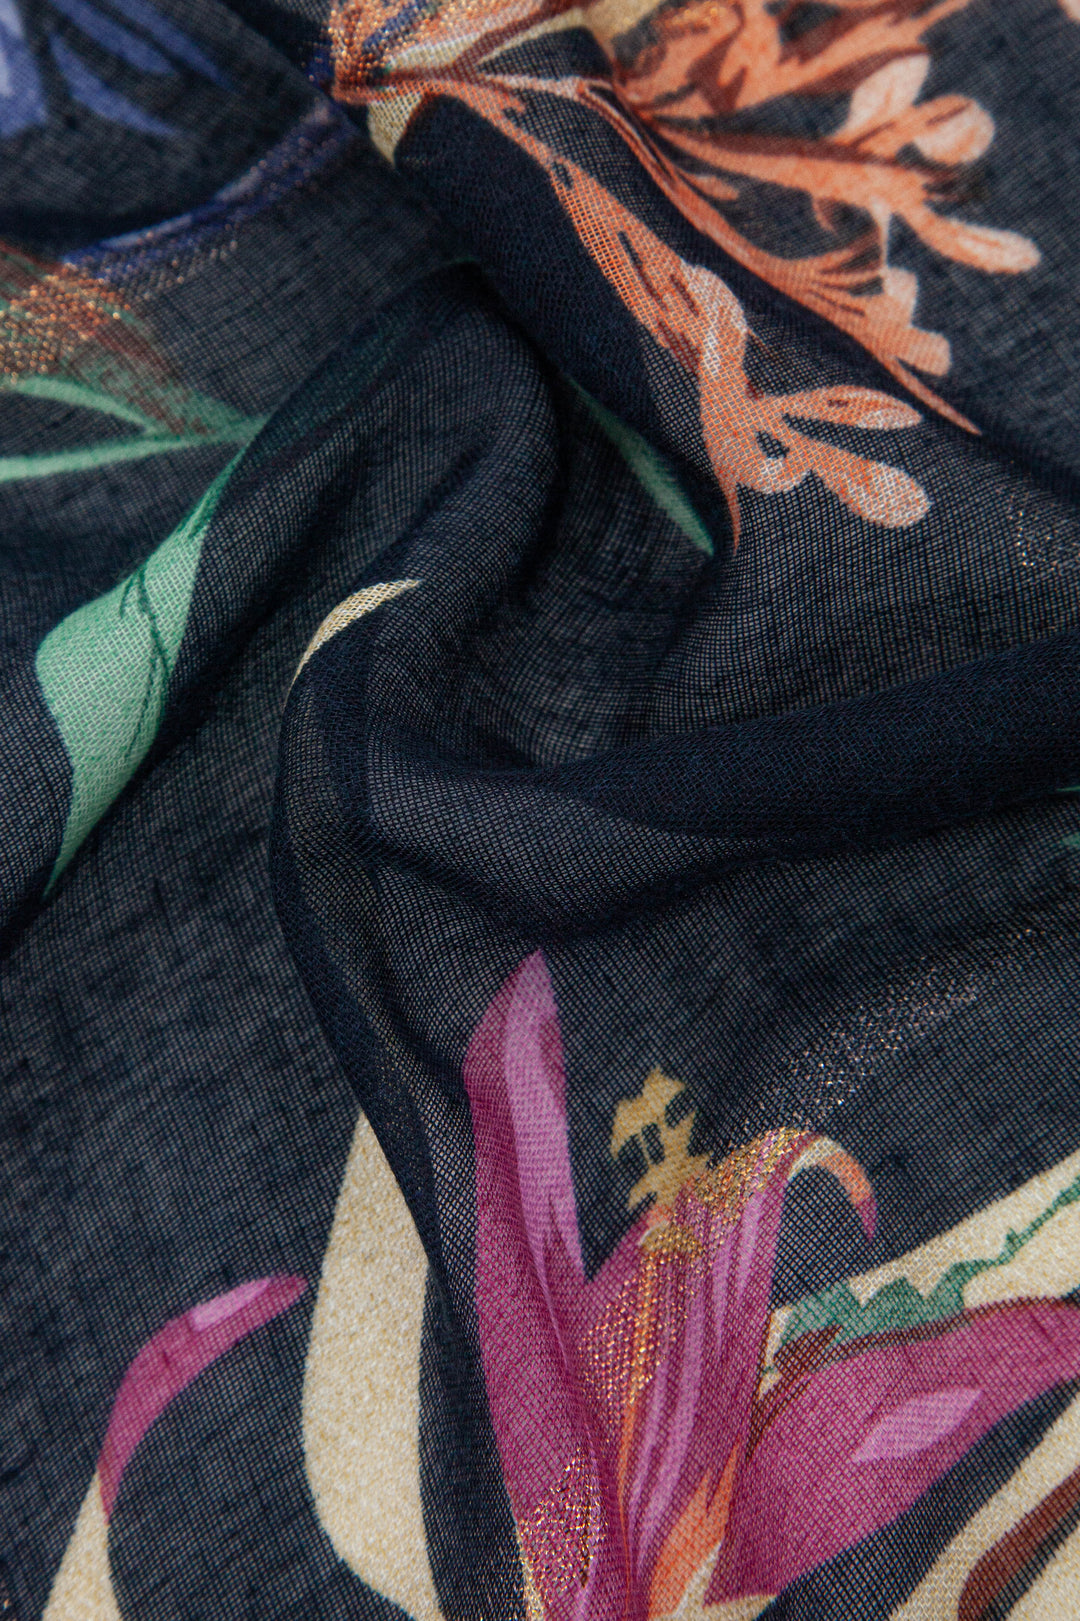 close up of the gold glitter stripe and floral pattern on the scarf